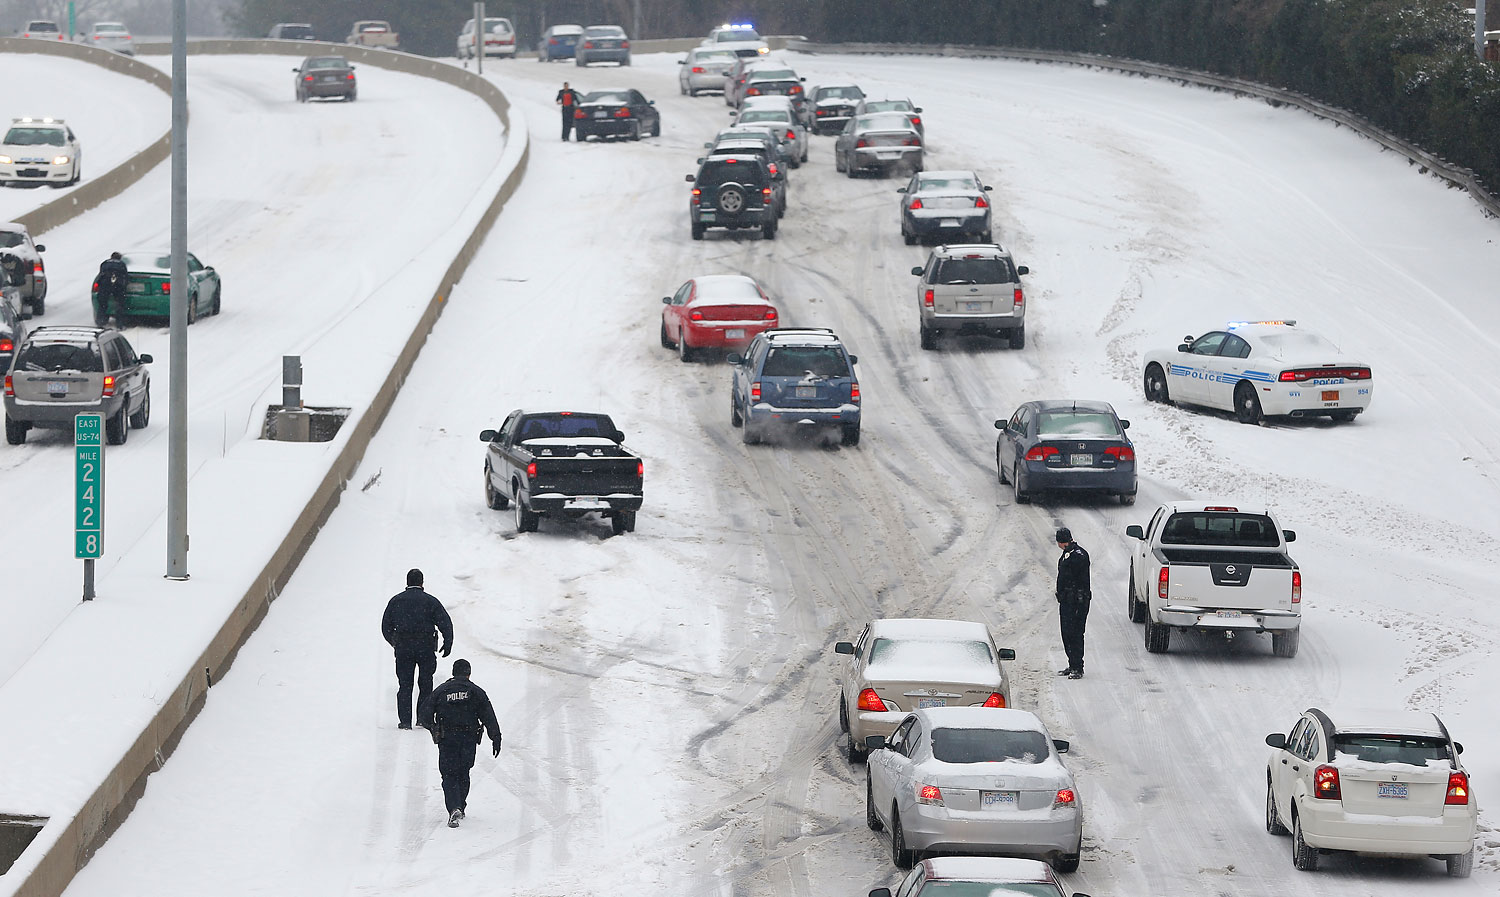 Charlotte Mecklenburg Police Officers work to assist motorists as they attempt to drive up a hill that is covered in snow in Charlotte